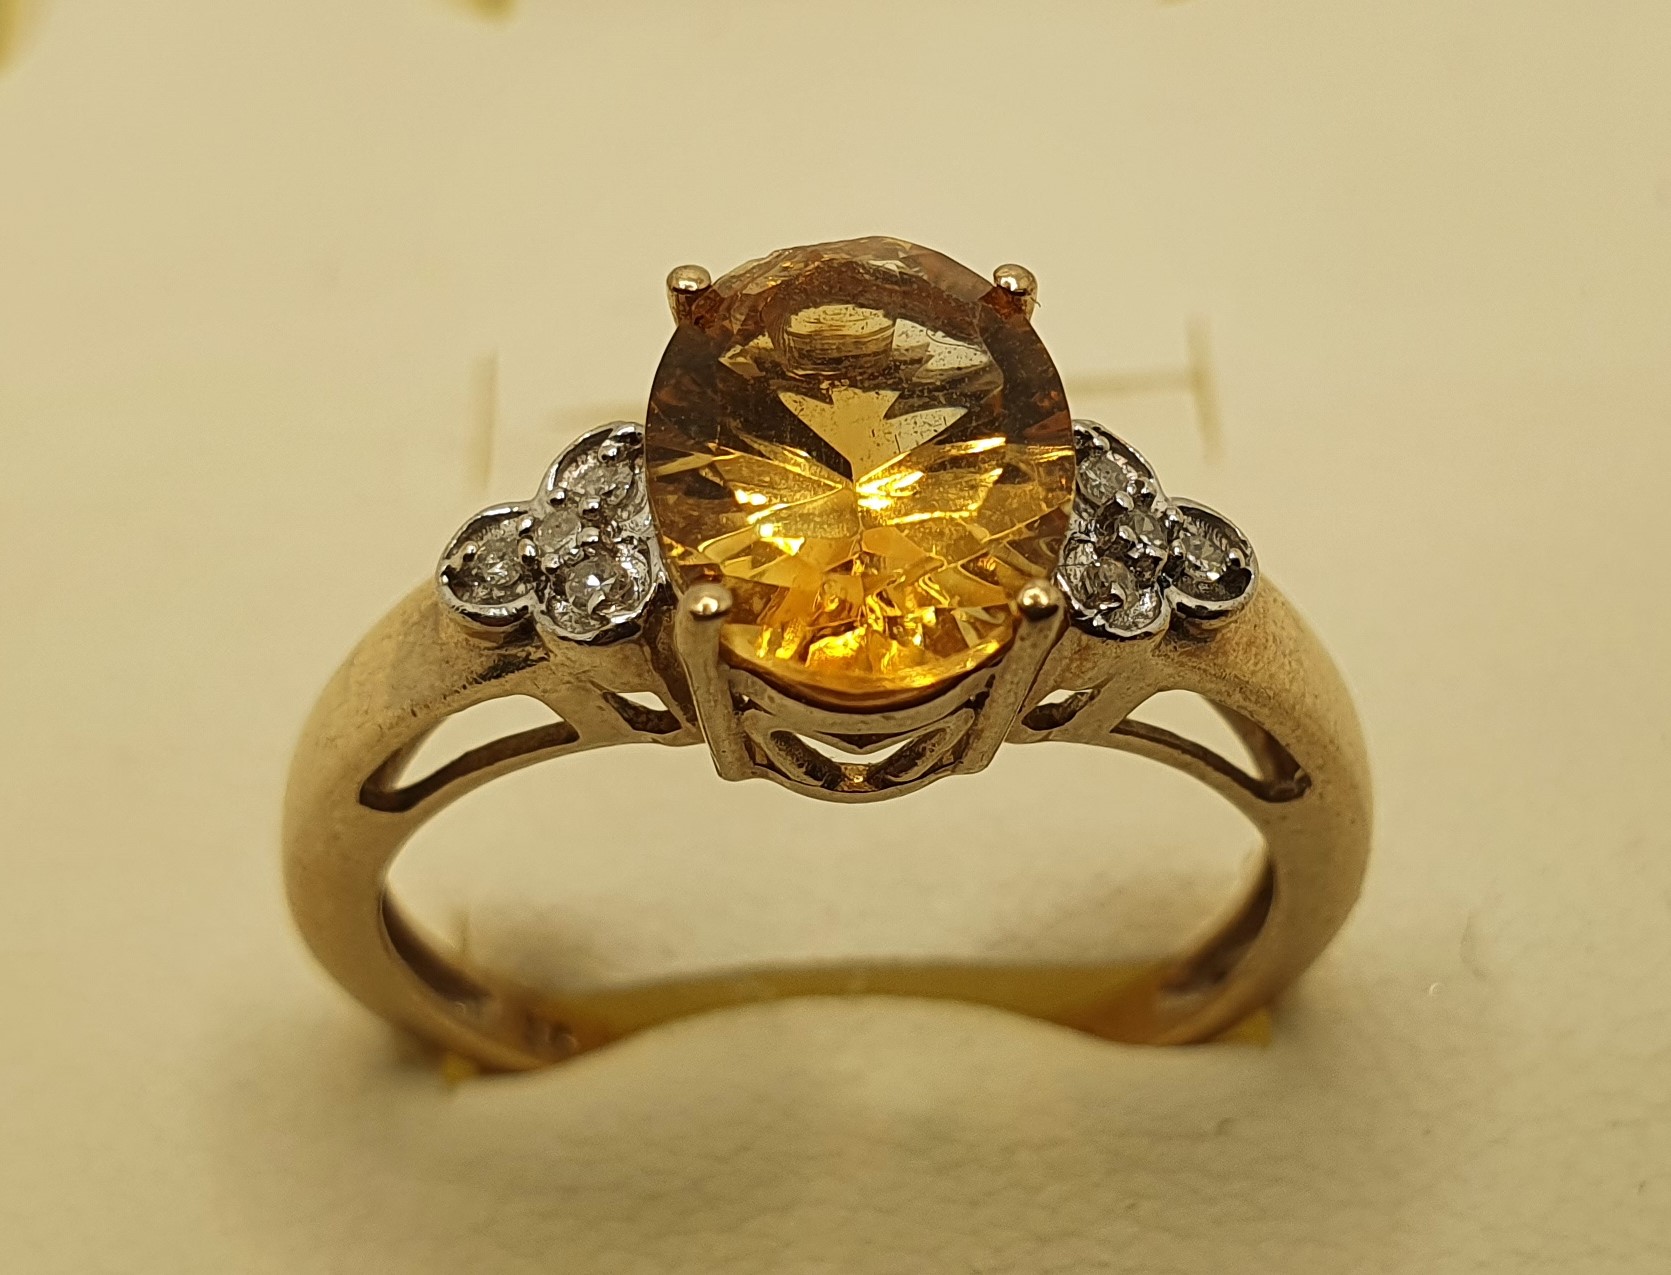 A 9ct gold citrine (chipped) and diamond ring, 2.5 gms, size O1/2.